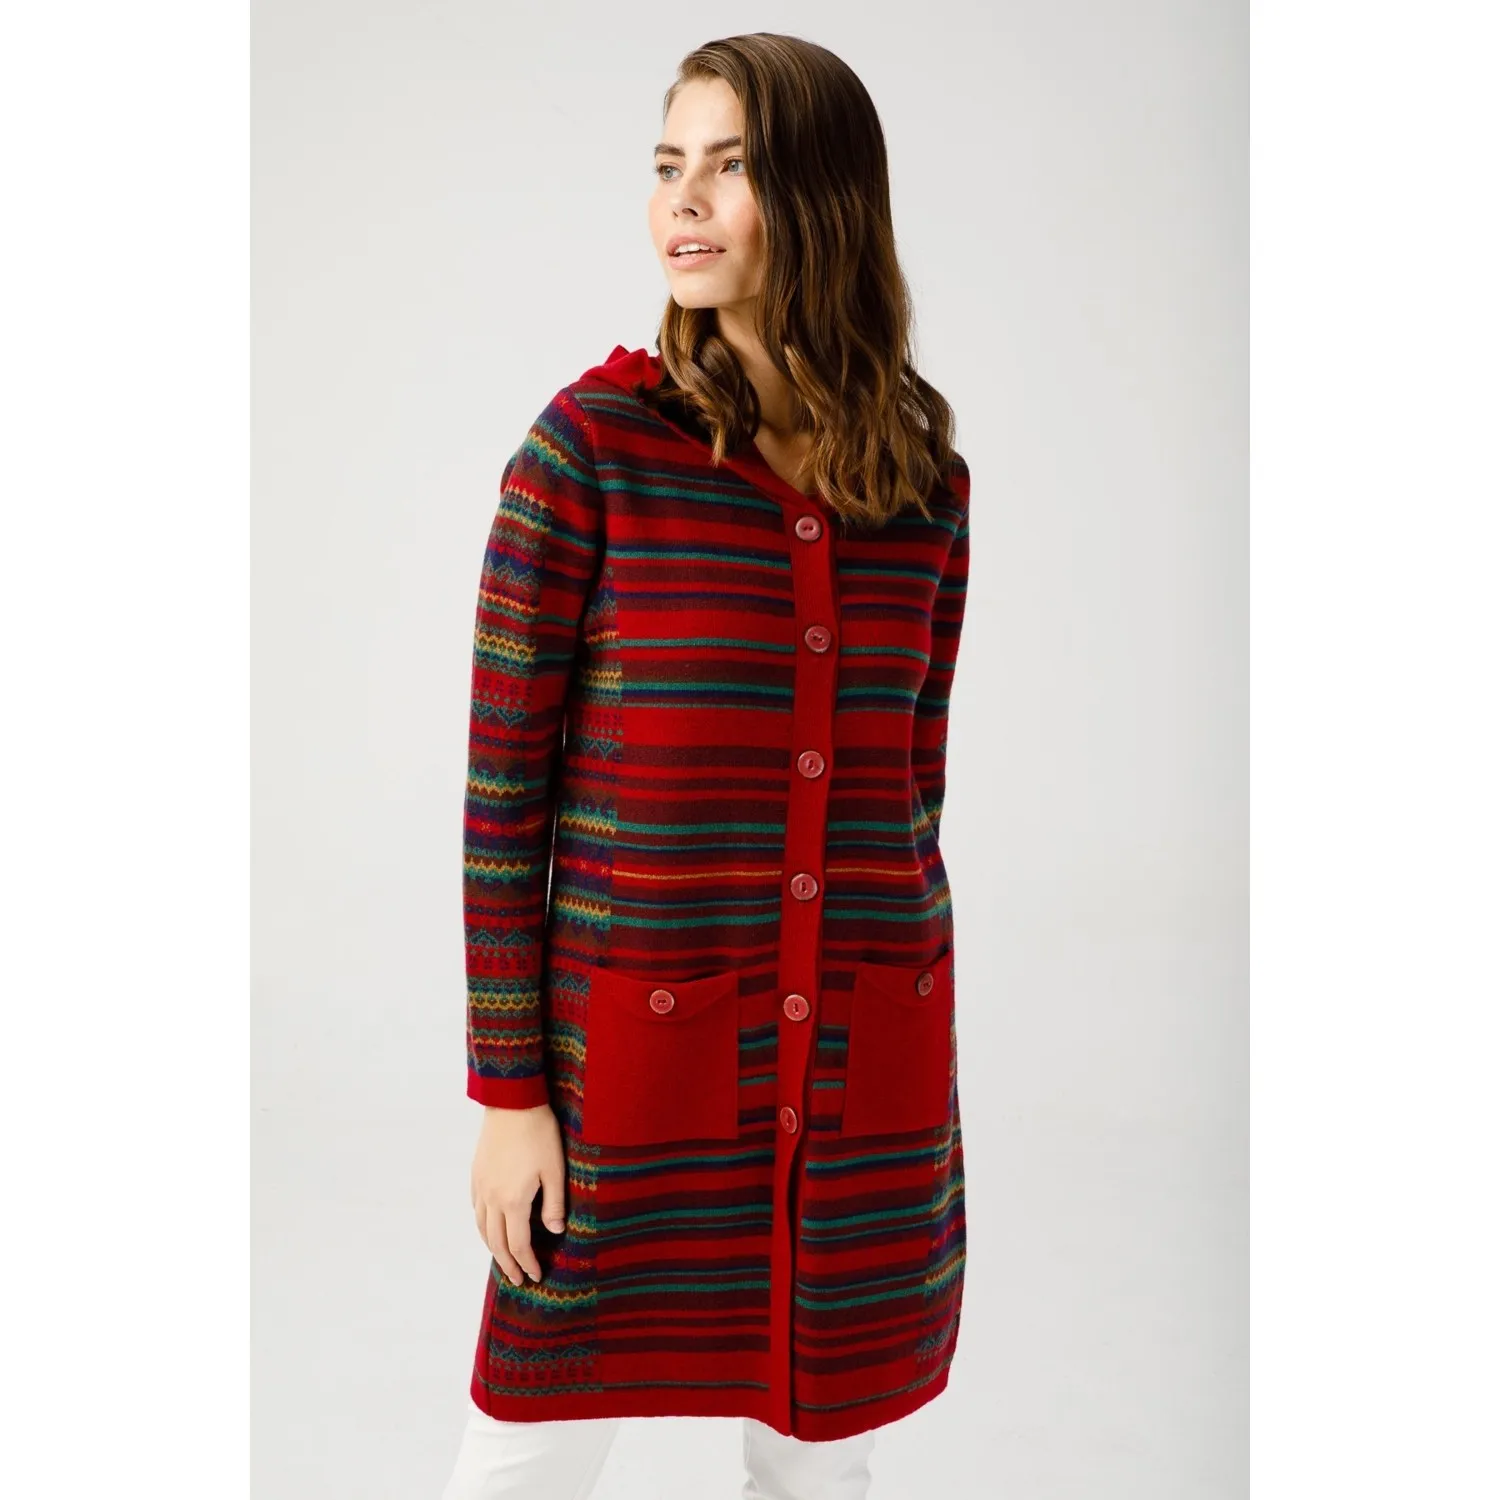 Pattern Knitwear Women Striped Jacquard Hooded Cherry Color Coat 100% Wool Fabric Quality Stylish Stance Unique Patterns